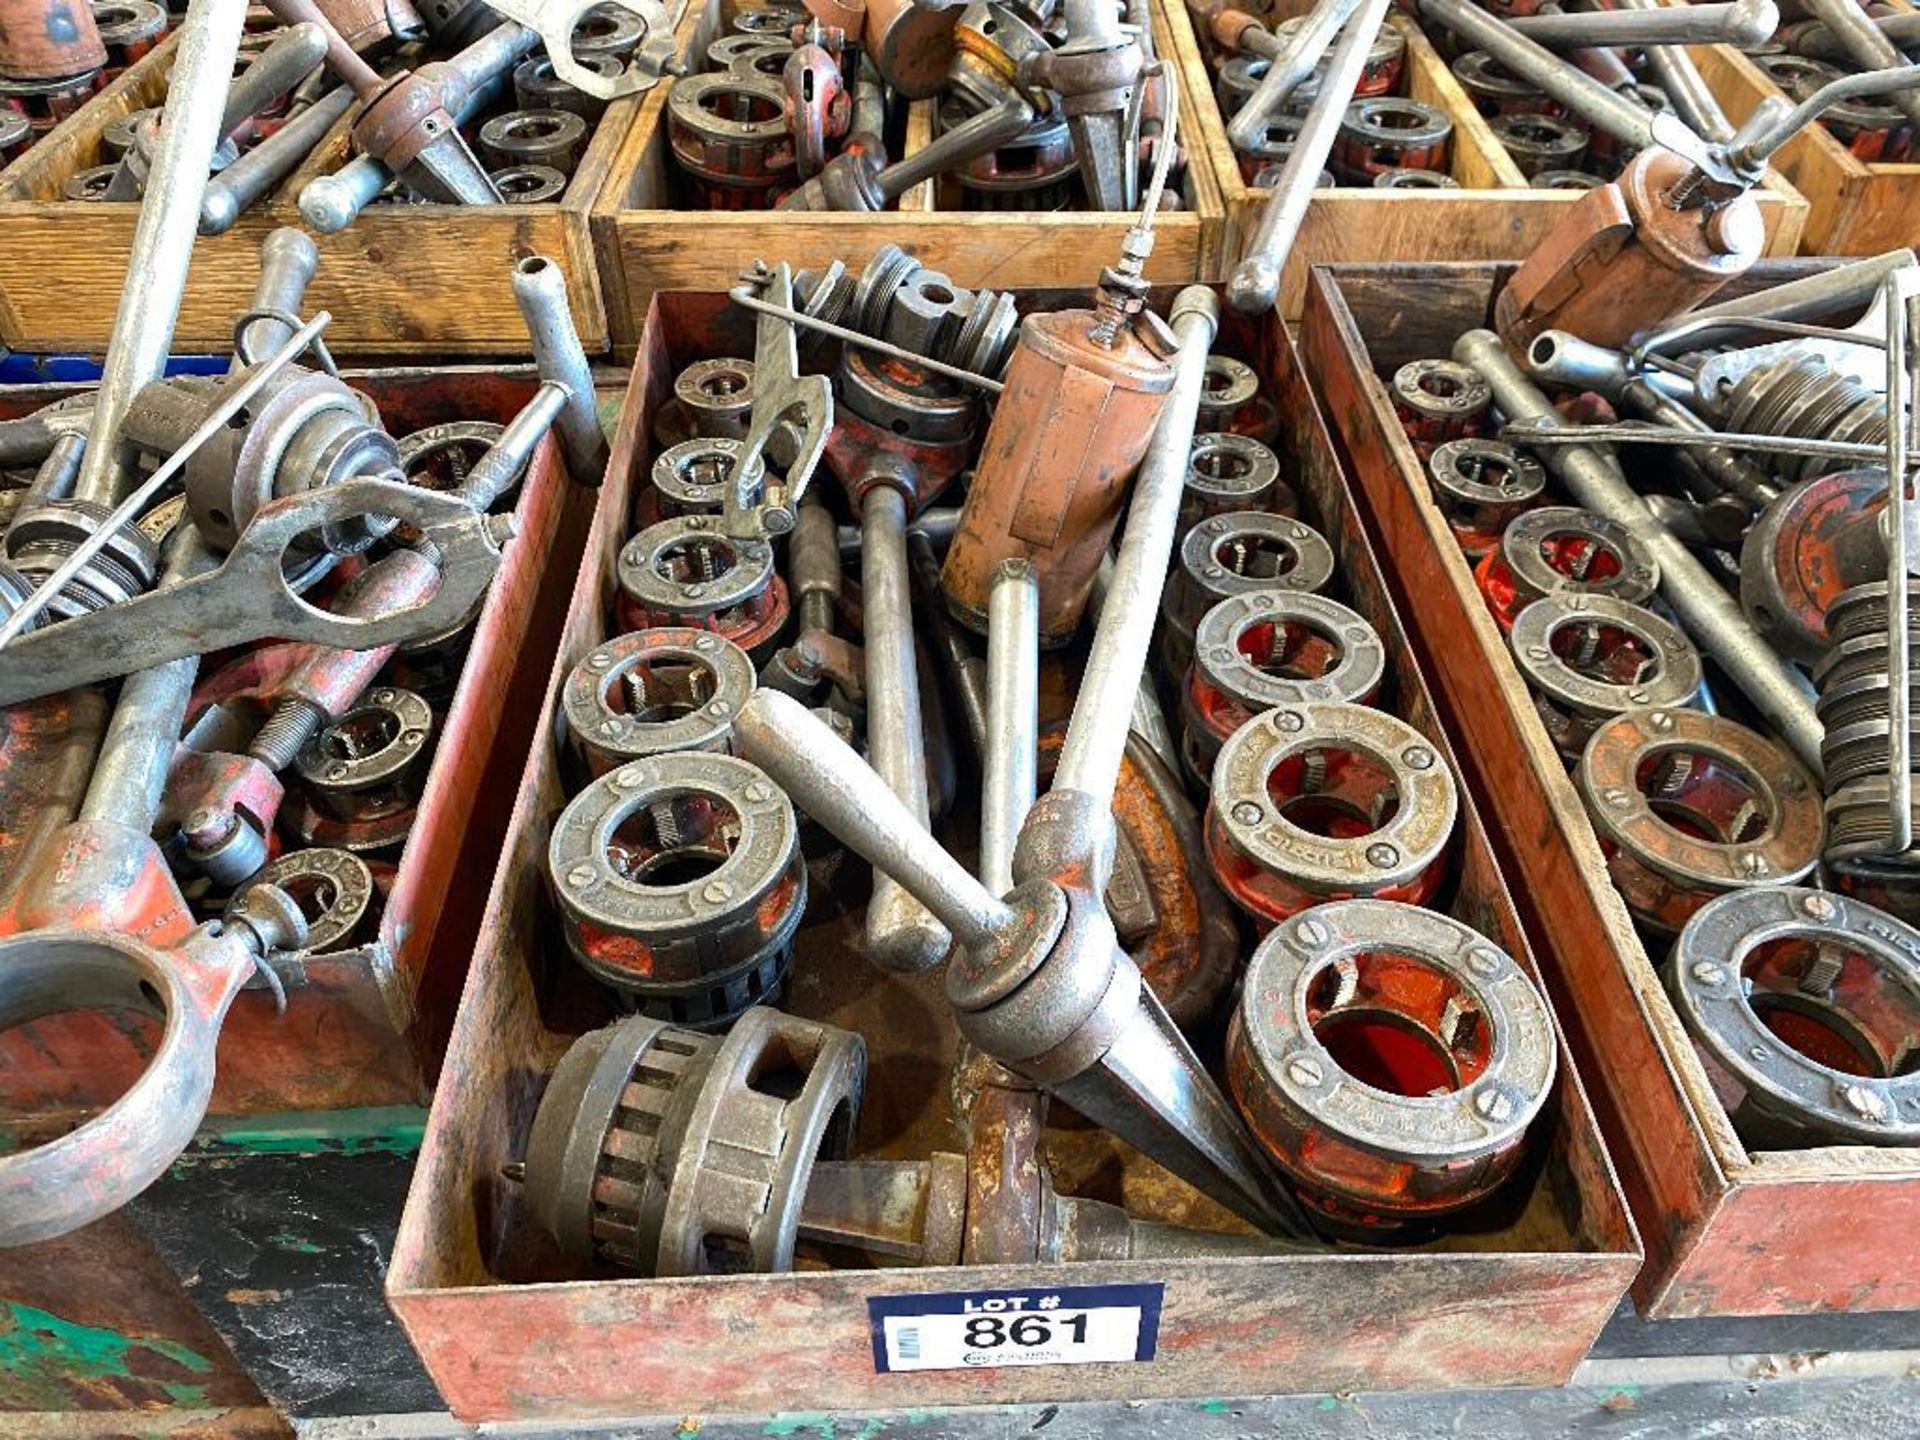 Lot of (2) Asst. Ridgid Manual Threaders Sets including Asst. Die Heads, Pipe Cutters, Reamers, Oil - Image 3 of 3